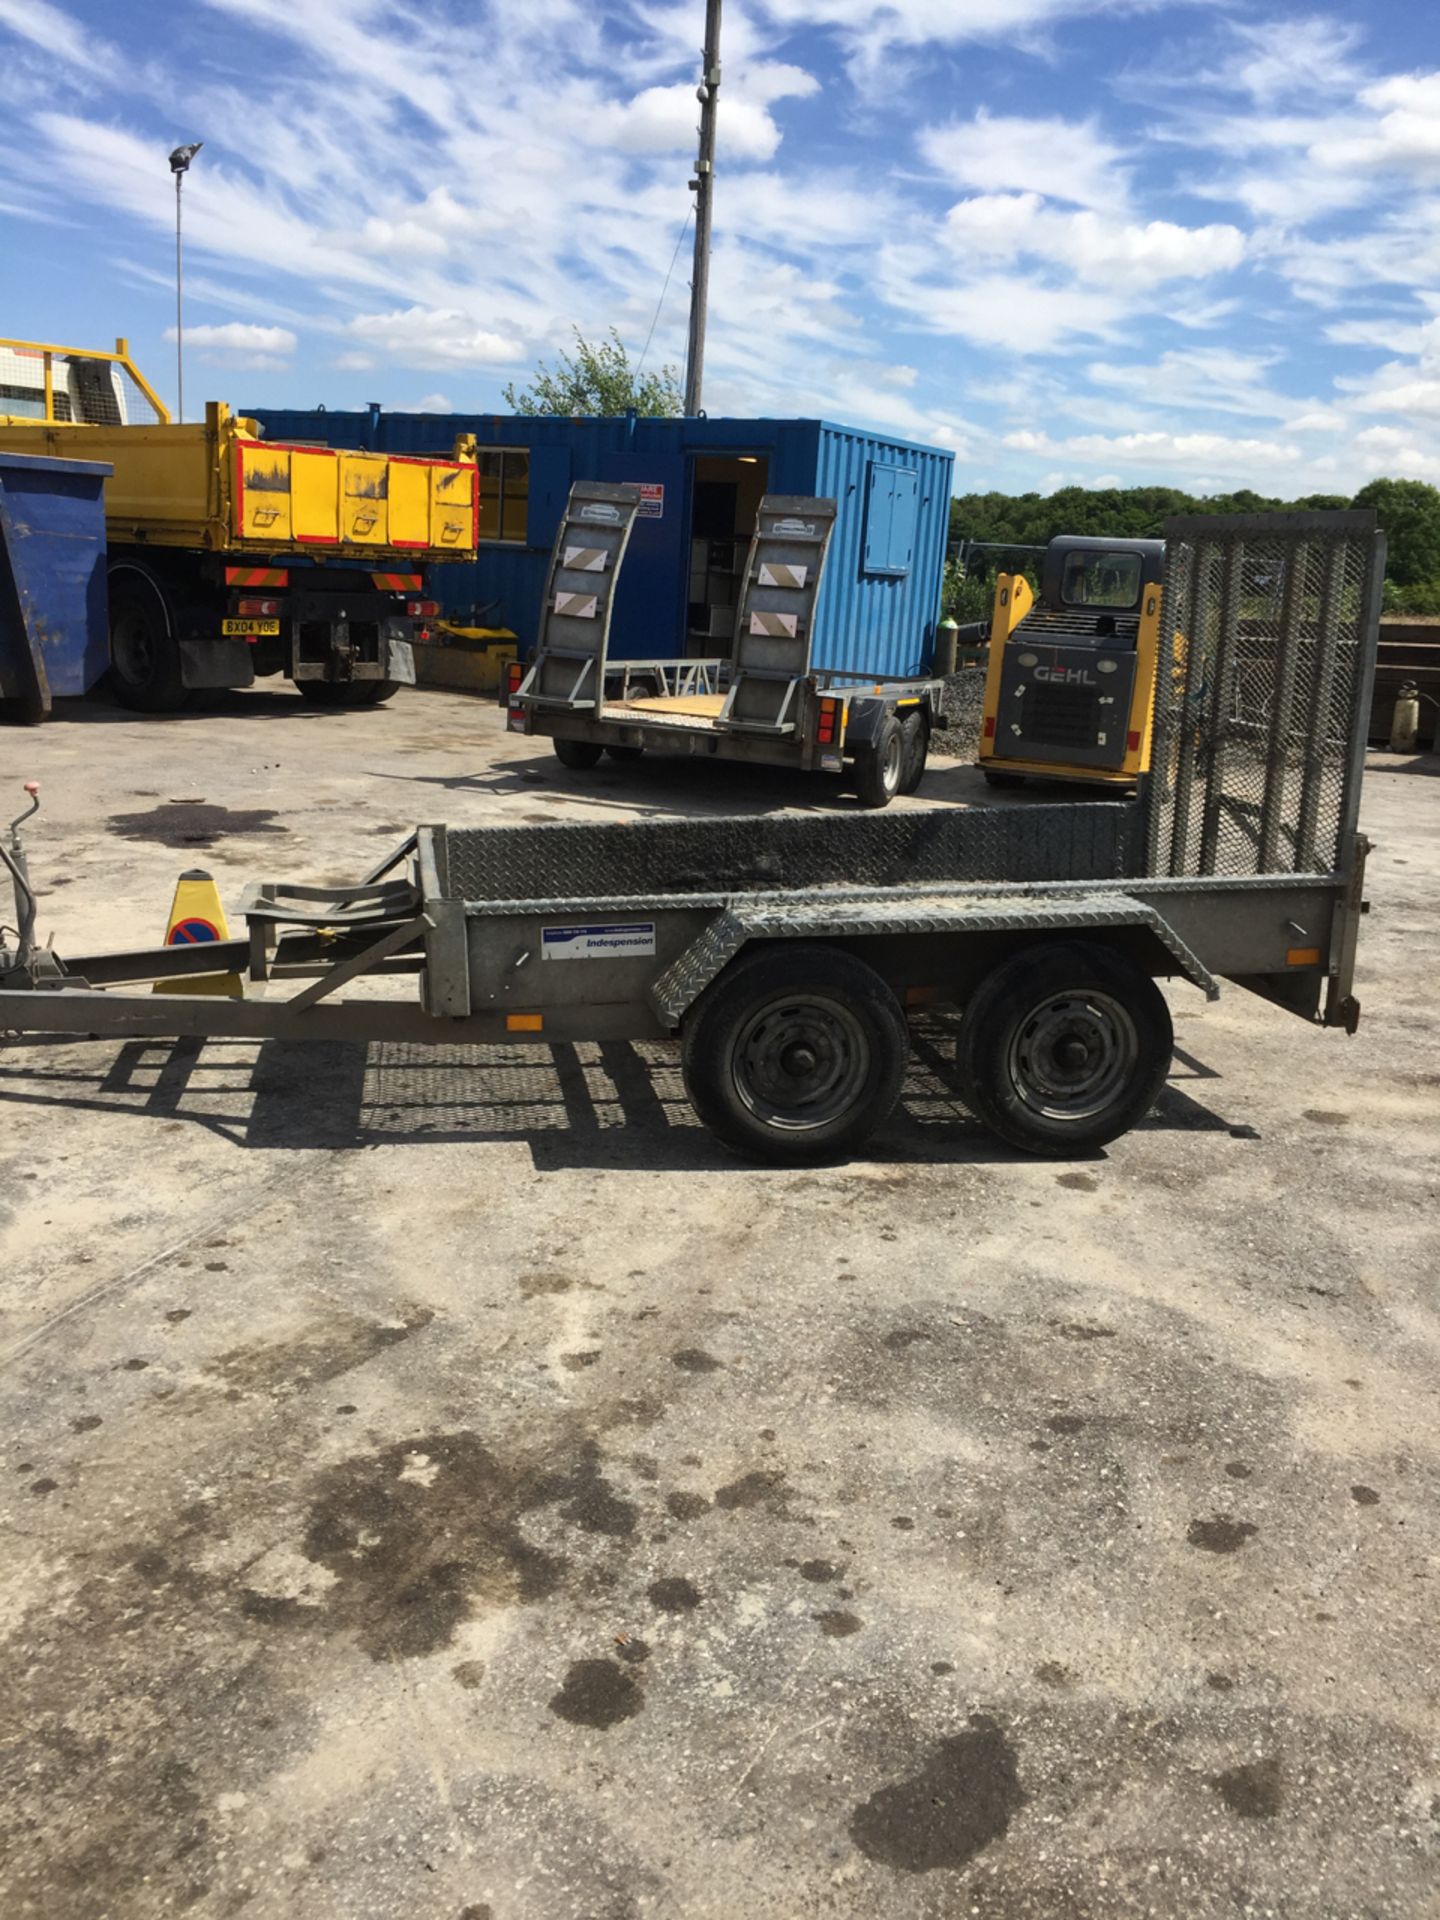 1.5t plant trailer by Indespension. Twin axle - outboard wheels/chqrplt 1 piece mudguards Drop board - Image 5 of 14